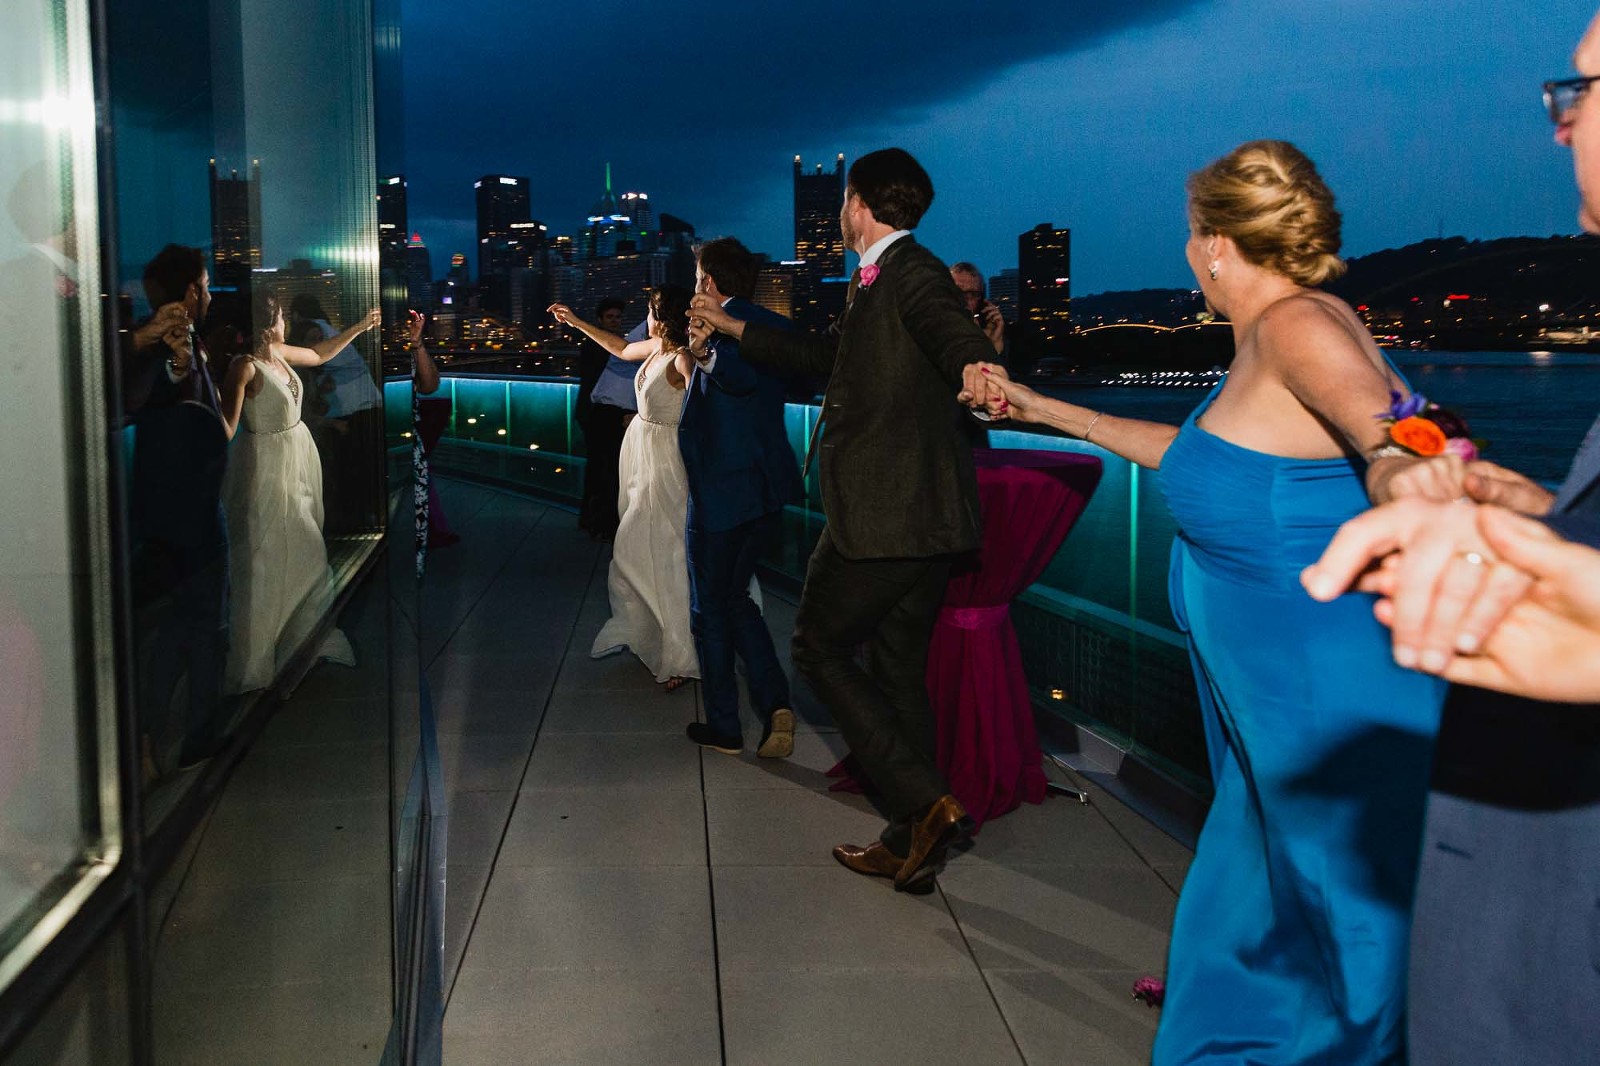 bride leads a train of wedding guests outside onto the patio at night, overlooking the city